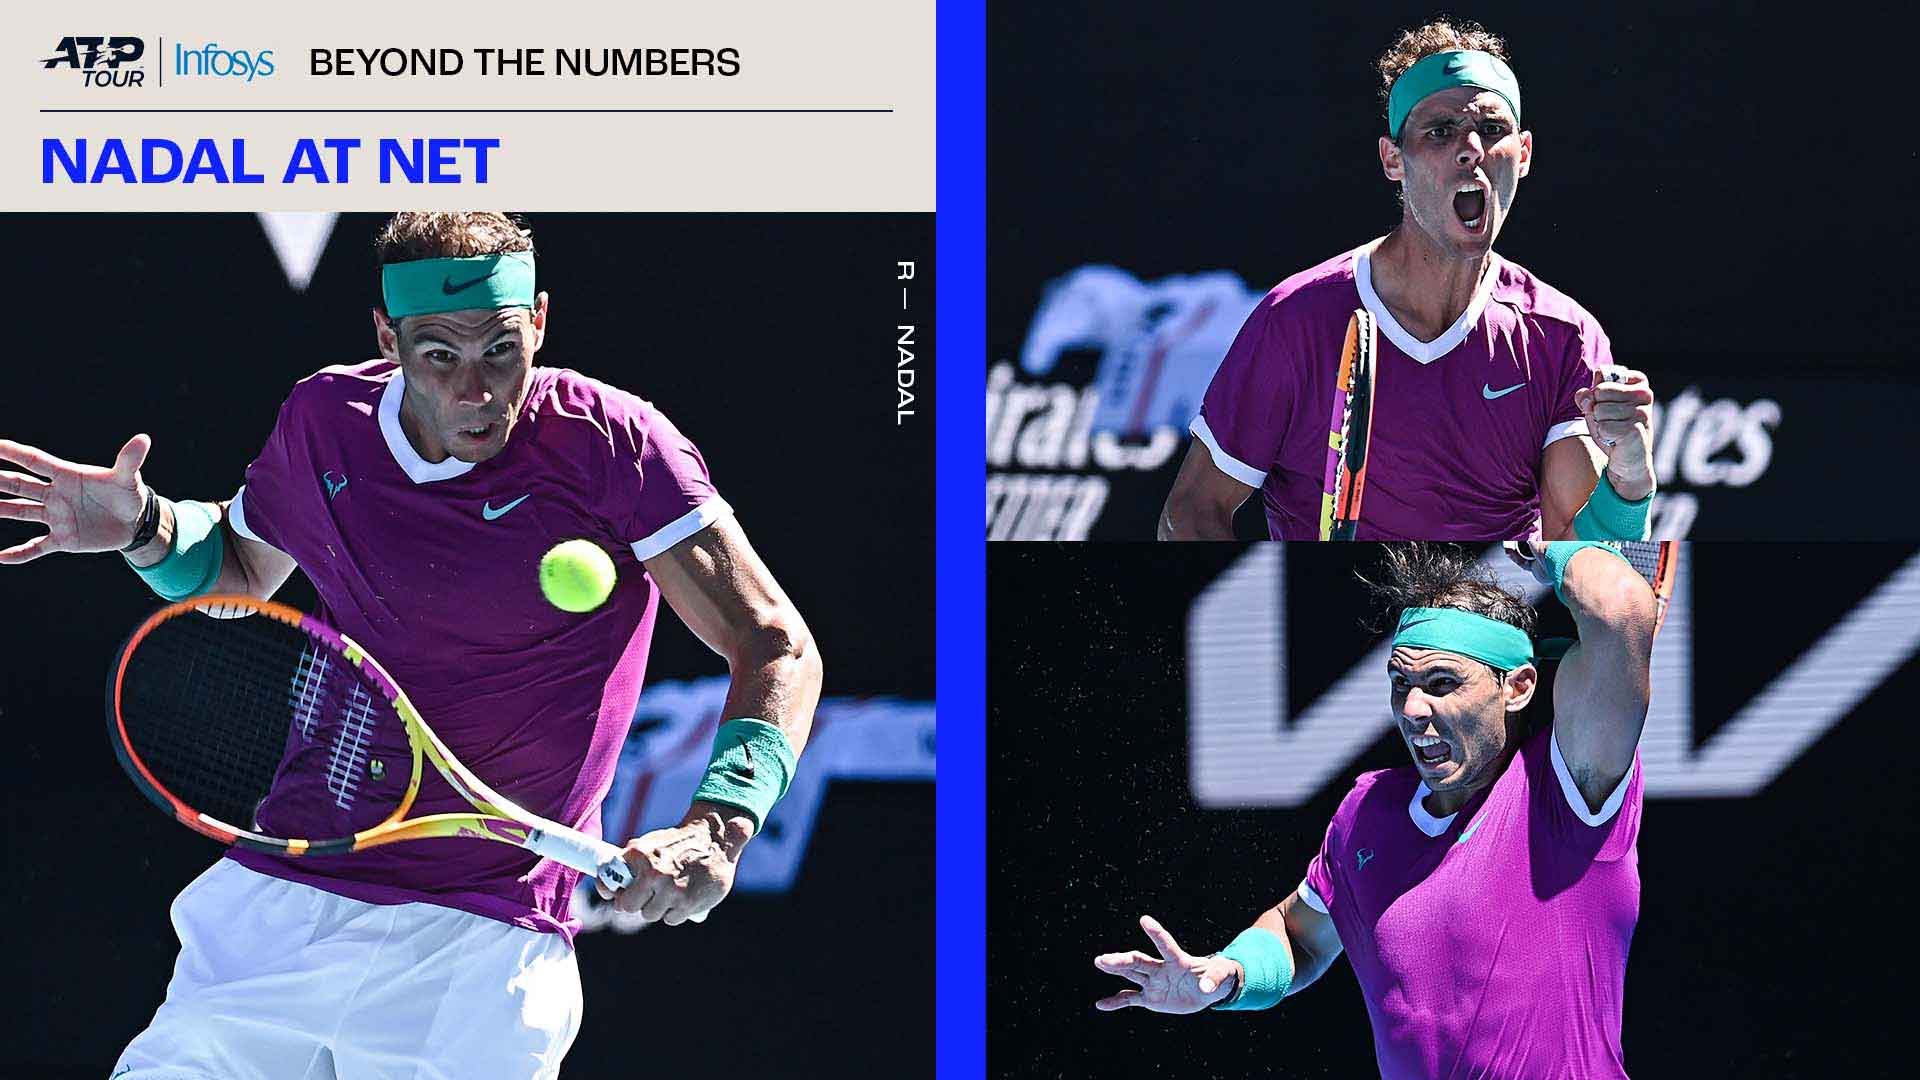 Nadal won 72 per cent (121/167) of his net points on Rod Laver Arena last year.